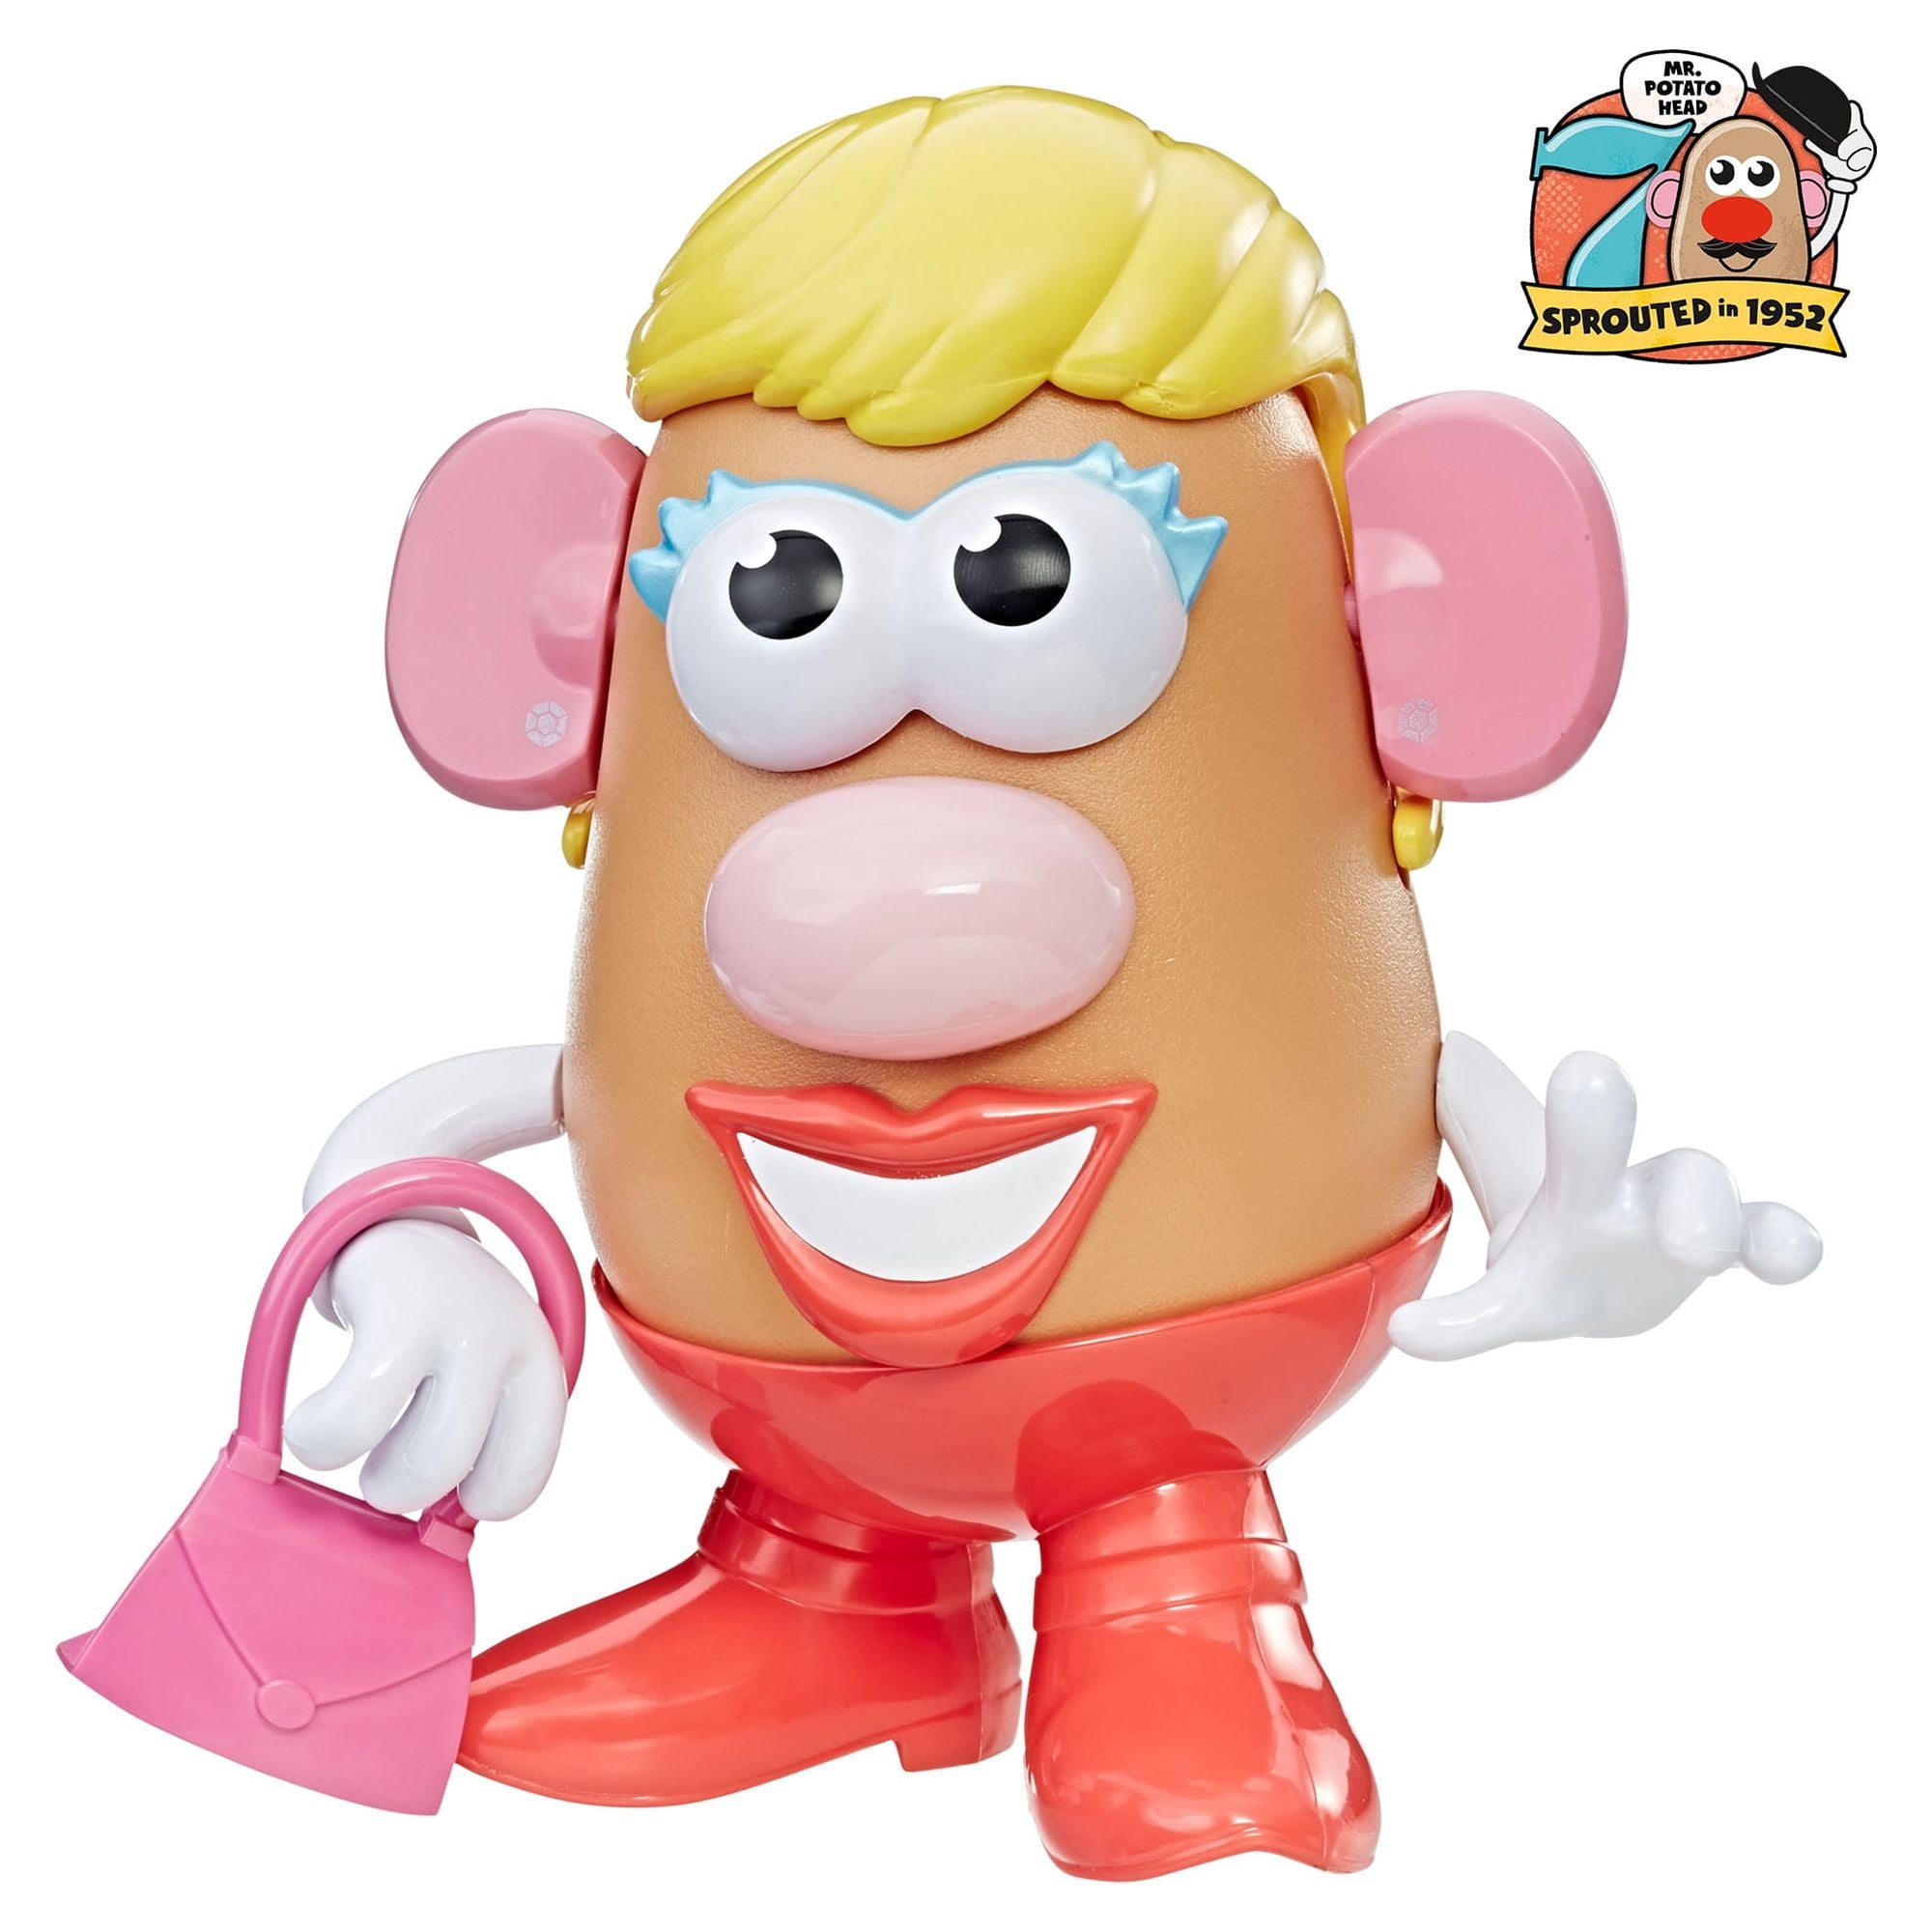 Mrs. Potato Head Classic Toy for Kids Ages 2+, 10 Different Accessories